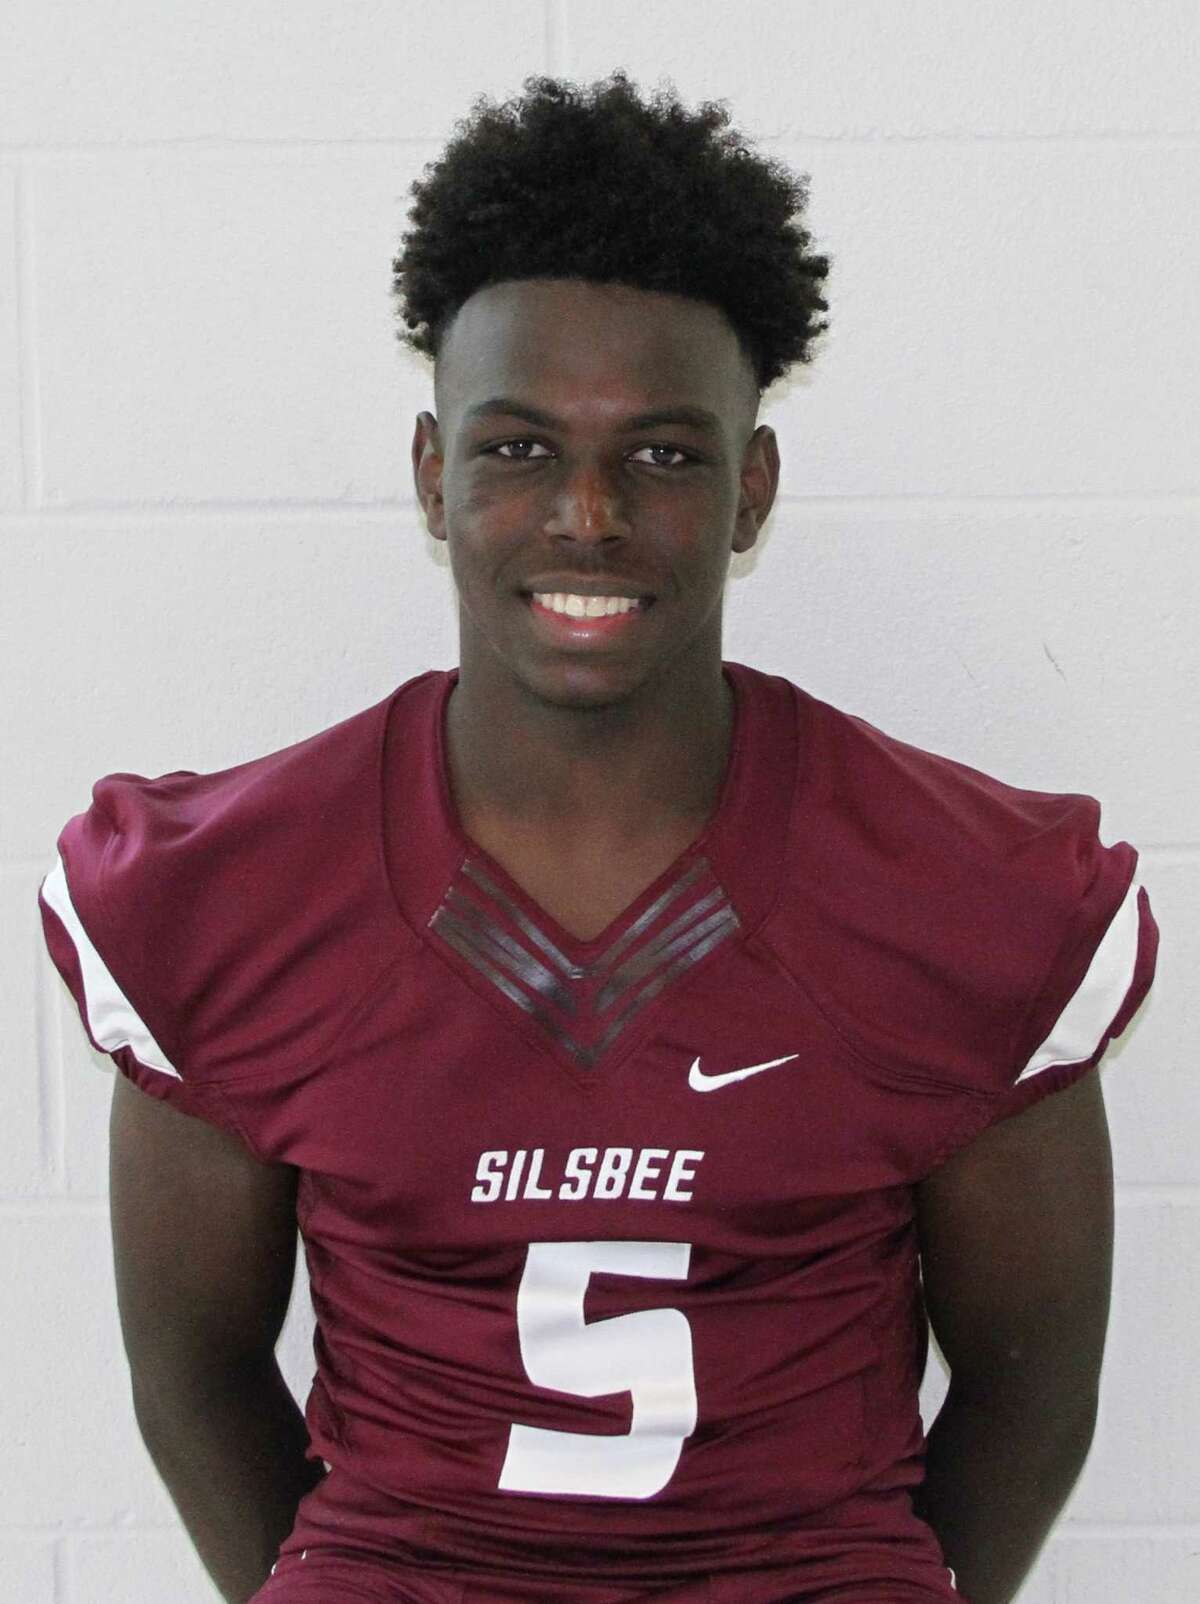 Dontre Thomas, Silsbee  Position: QB  Height: 6-1  Weight: 185 pounds  Grade: Senior  Thomas is the unquestioned starter after losing weight over the summer and gaining mores speed to morph into a dual-threat quarterback.